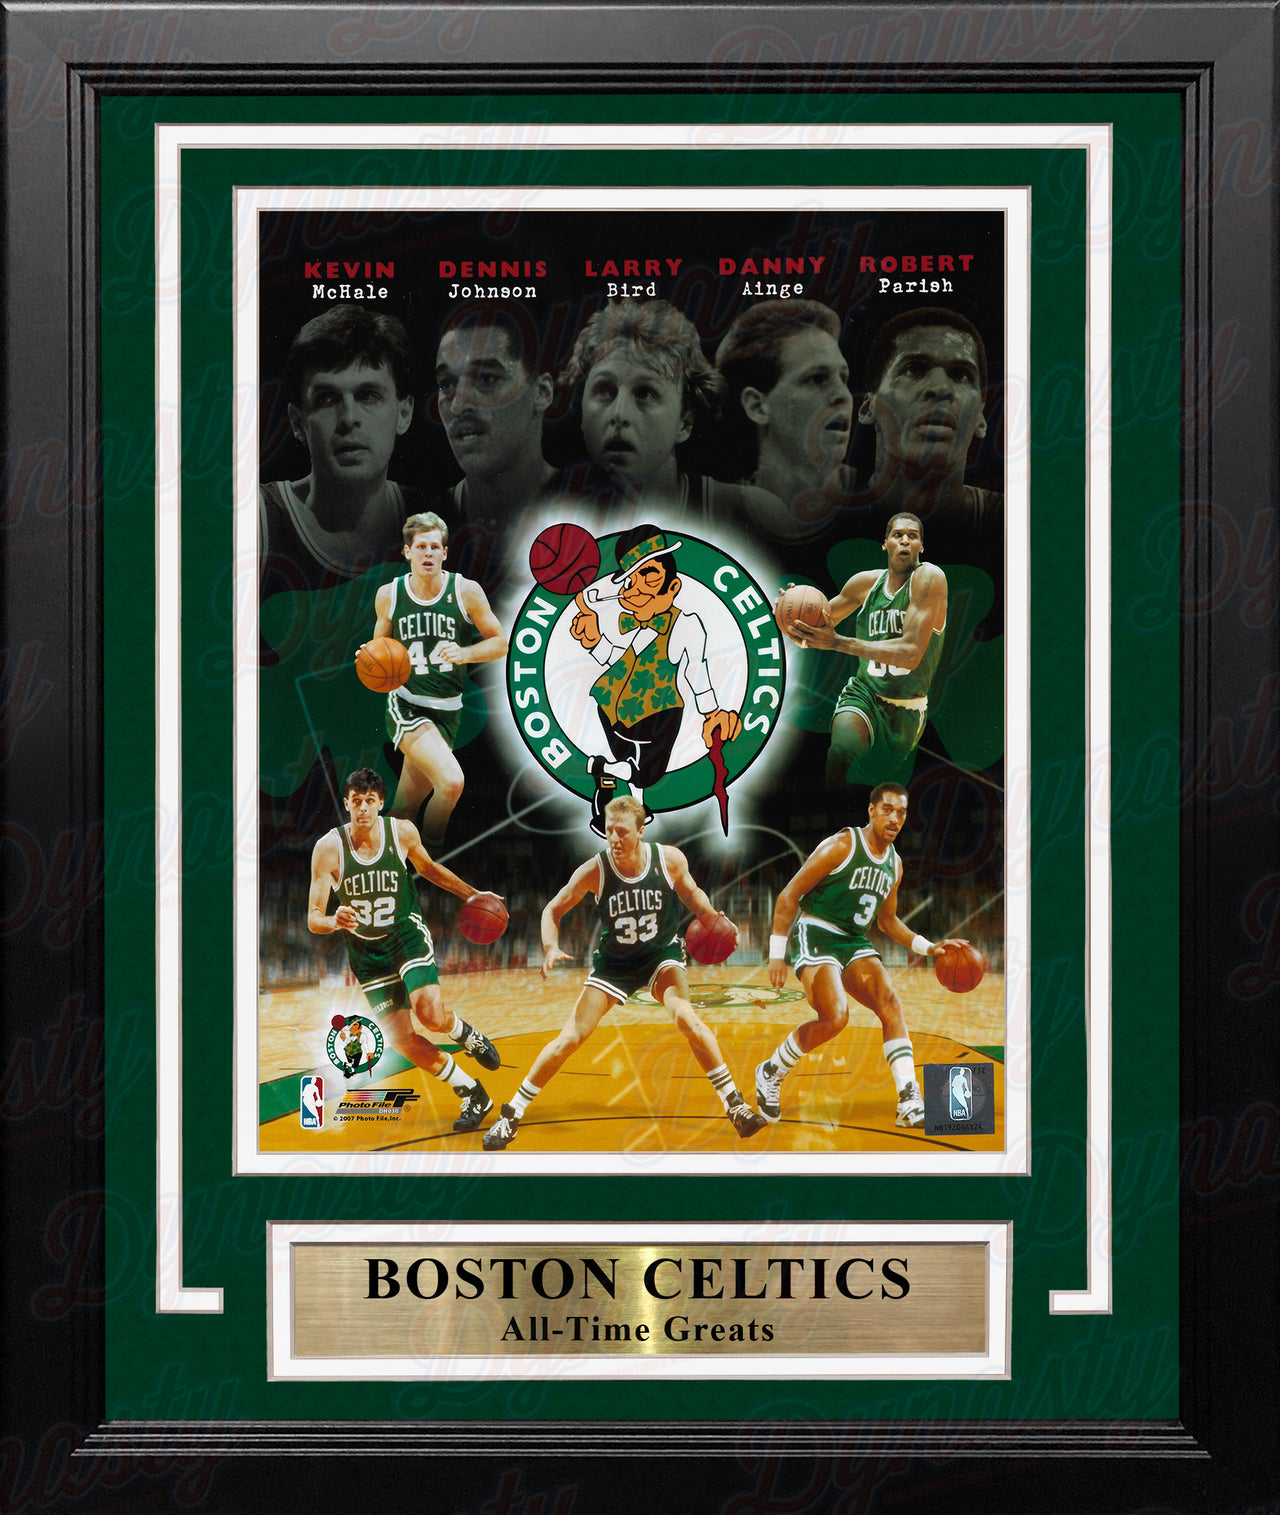 Boston Celtics All-Time Greats 8" x 10" Framed Basketball Collage Photo - Dynasty Sports & Framing 